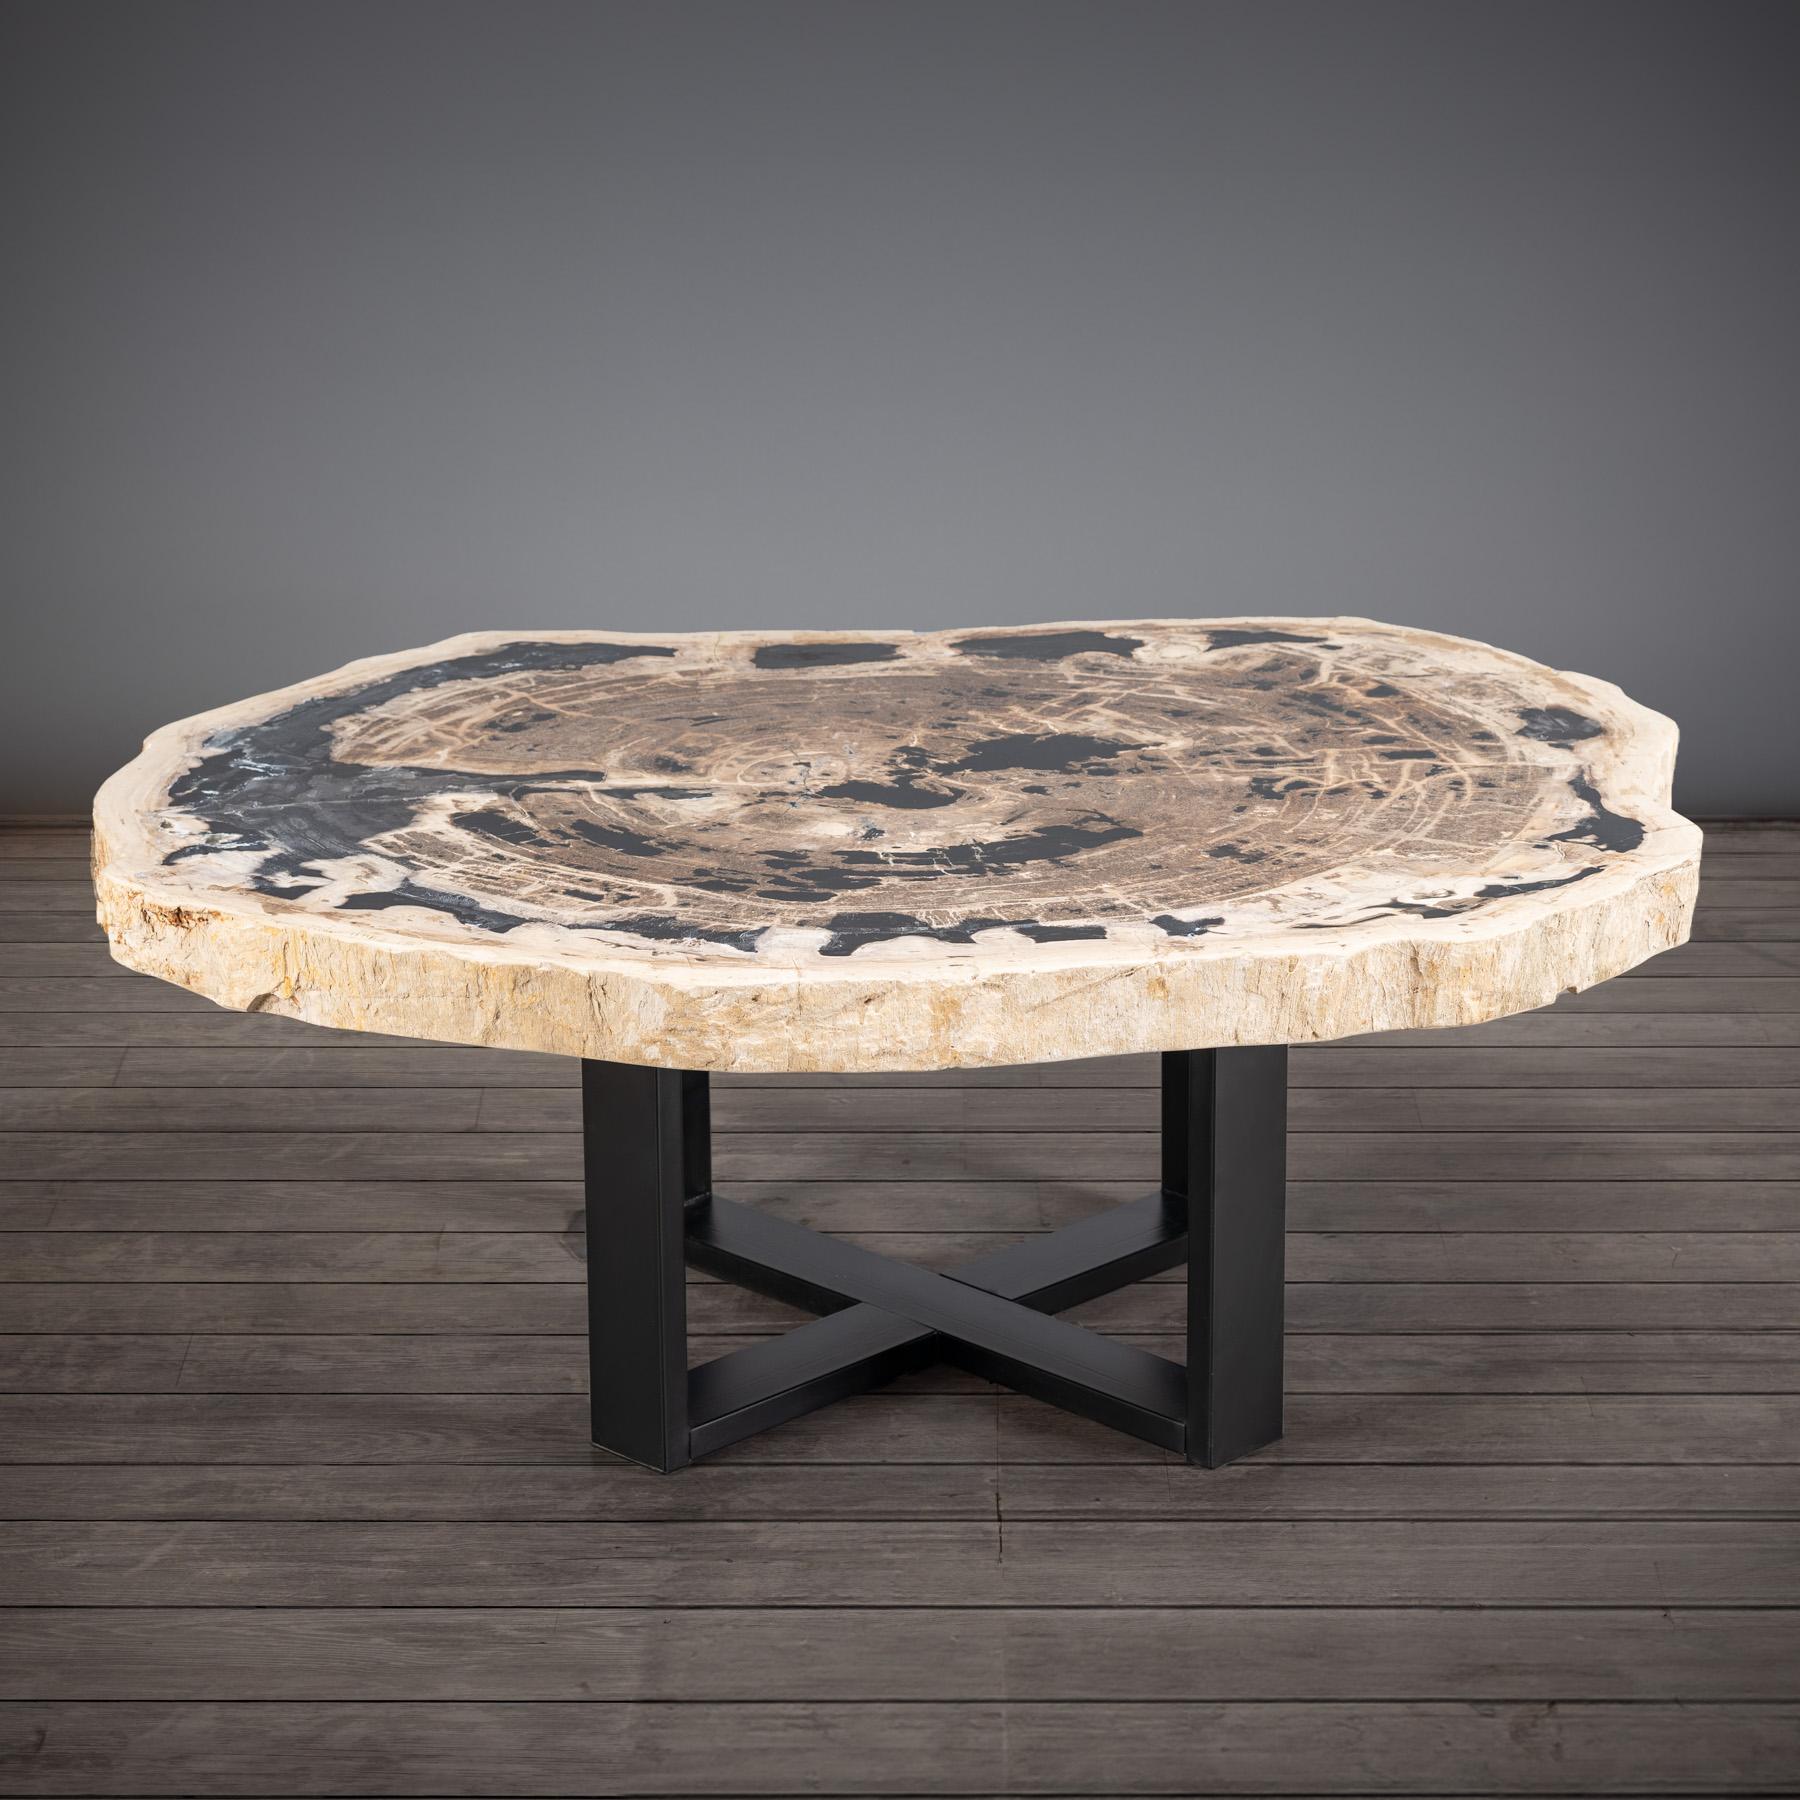 Contemporary Center or Coffee Table, Natural Shape, Petrified Wood with Metal Base